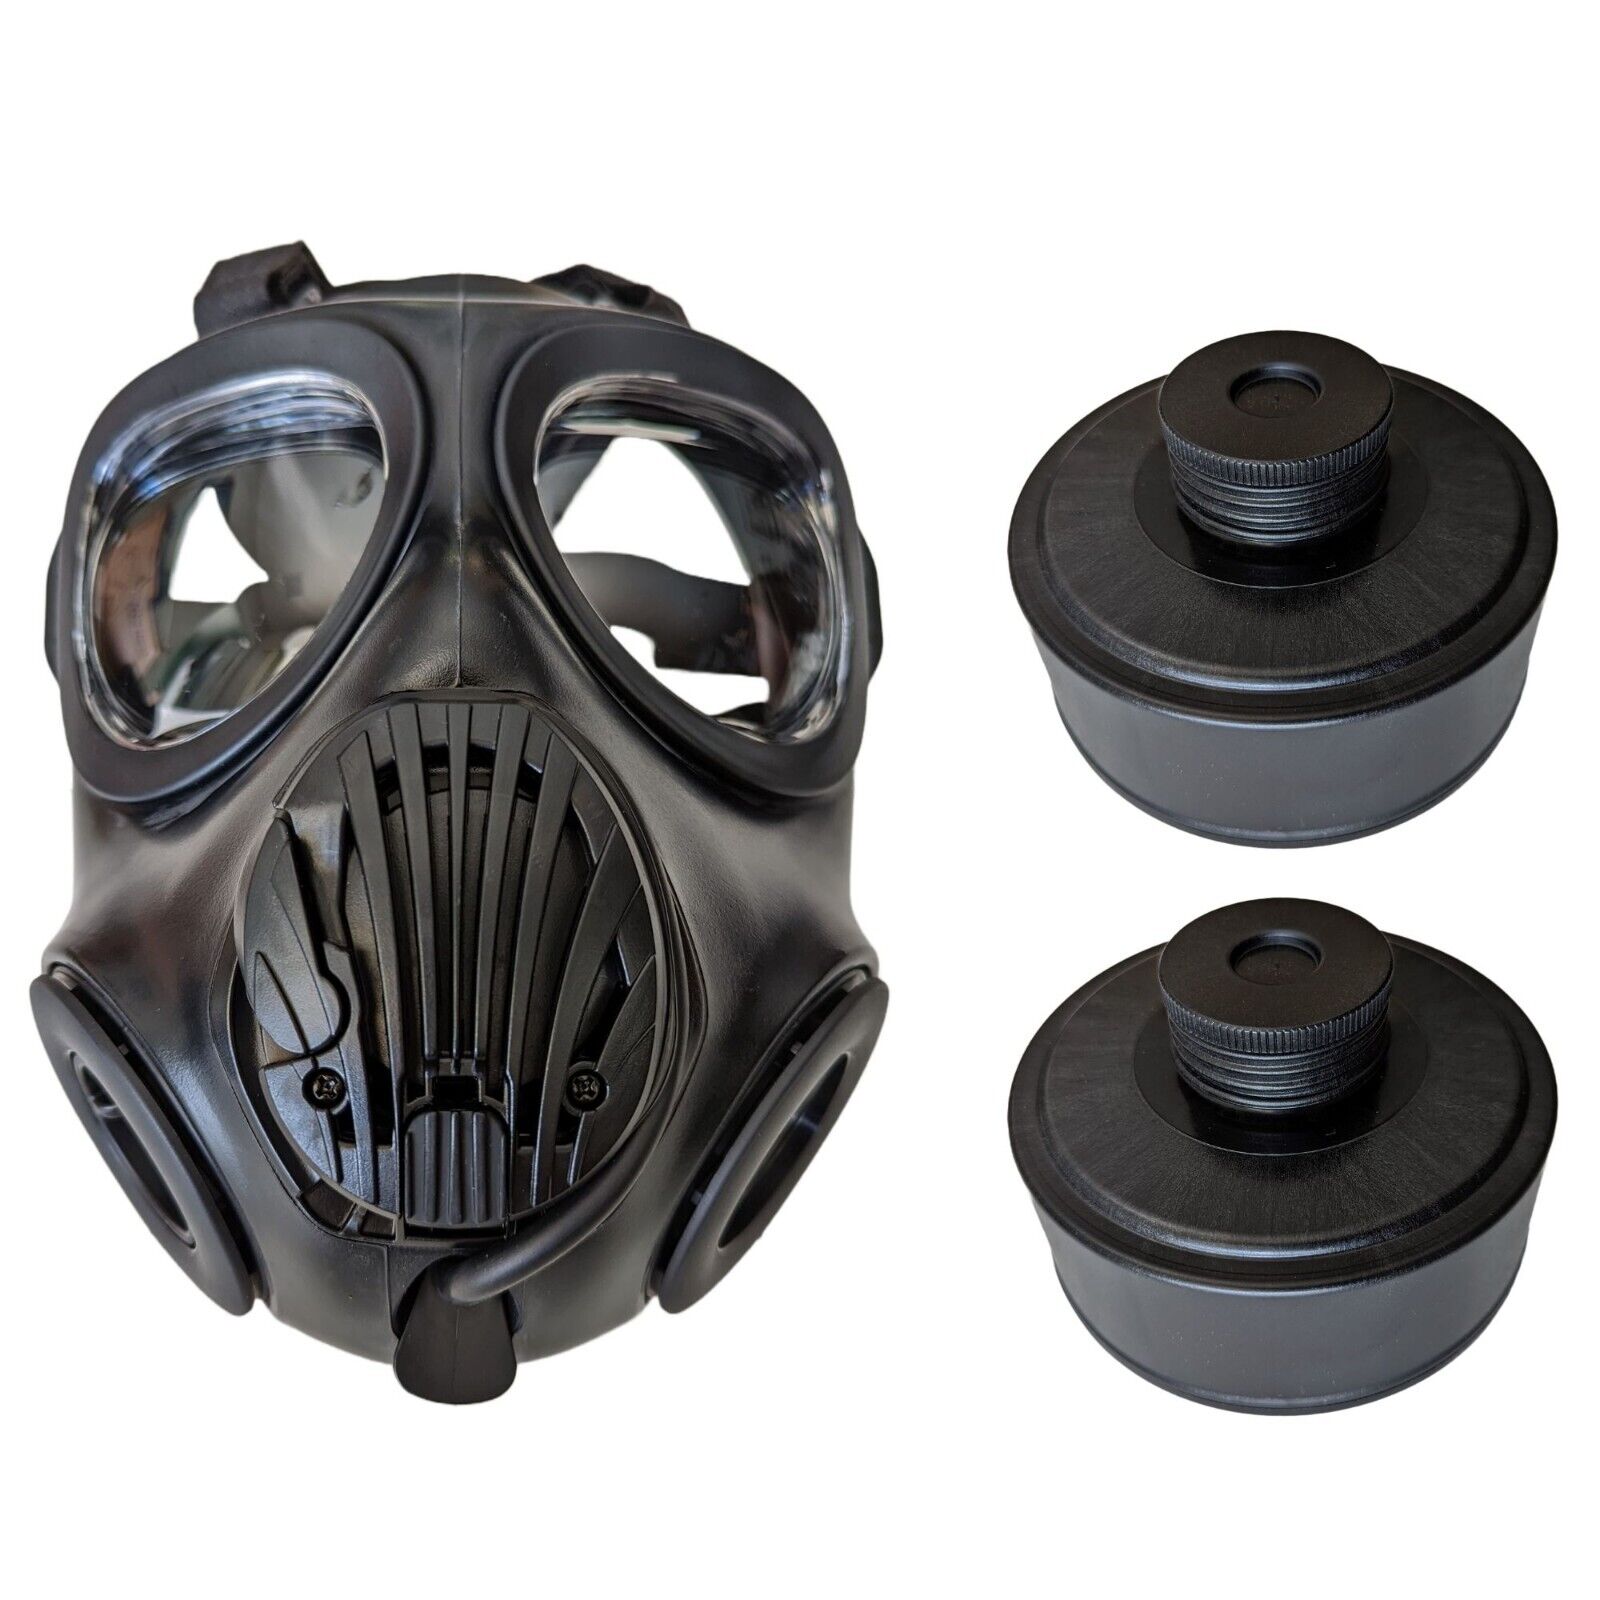 K3 Military Tactical NATO 40mm CBRN Chemical Gas Mask Respirator & 2 NBC Filters